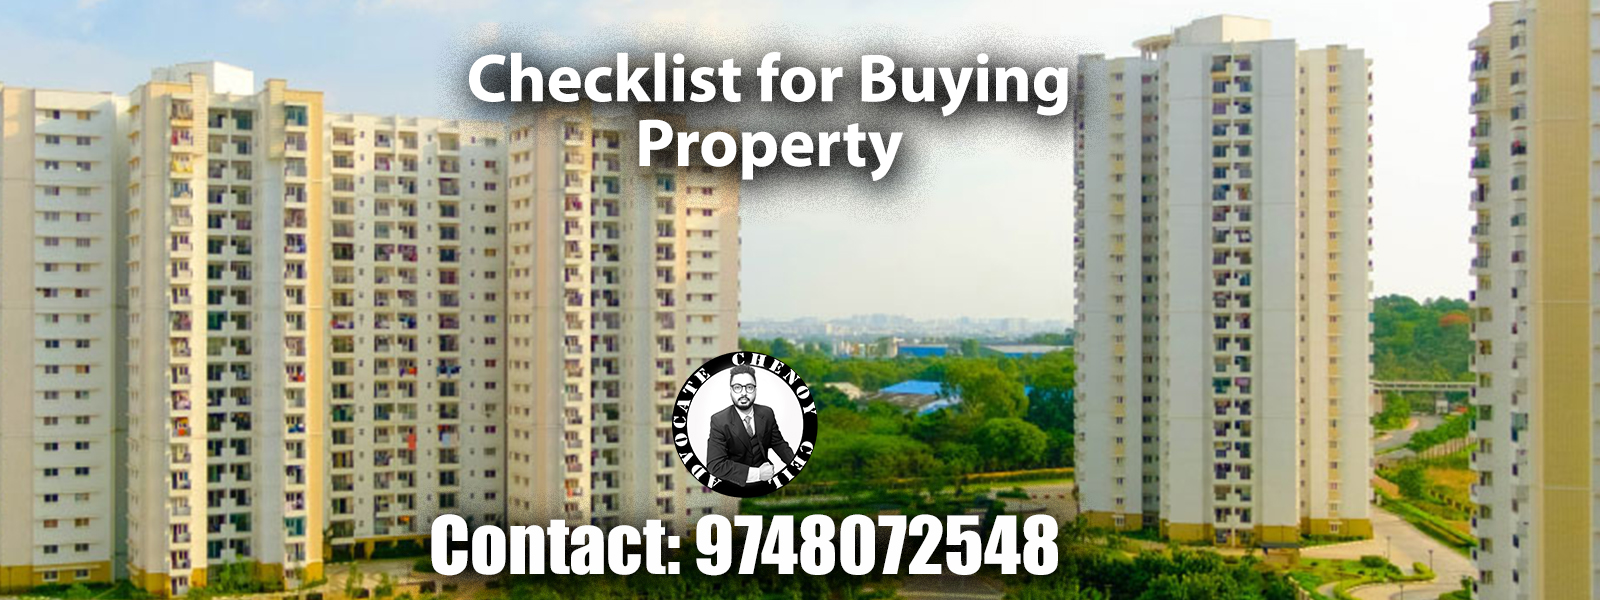 Checklist for Buying Property